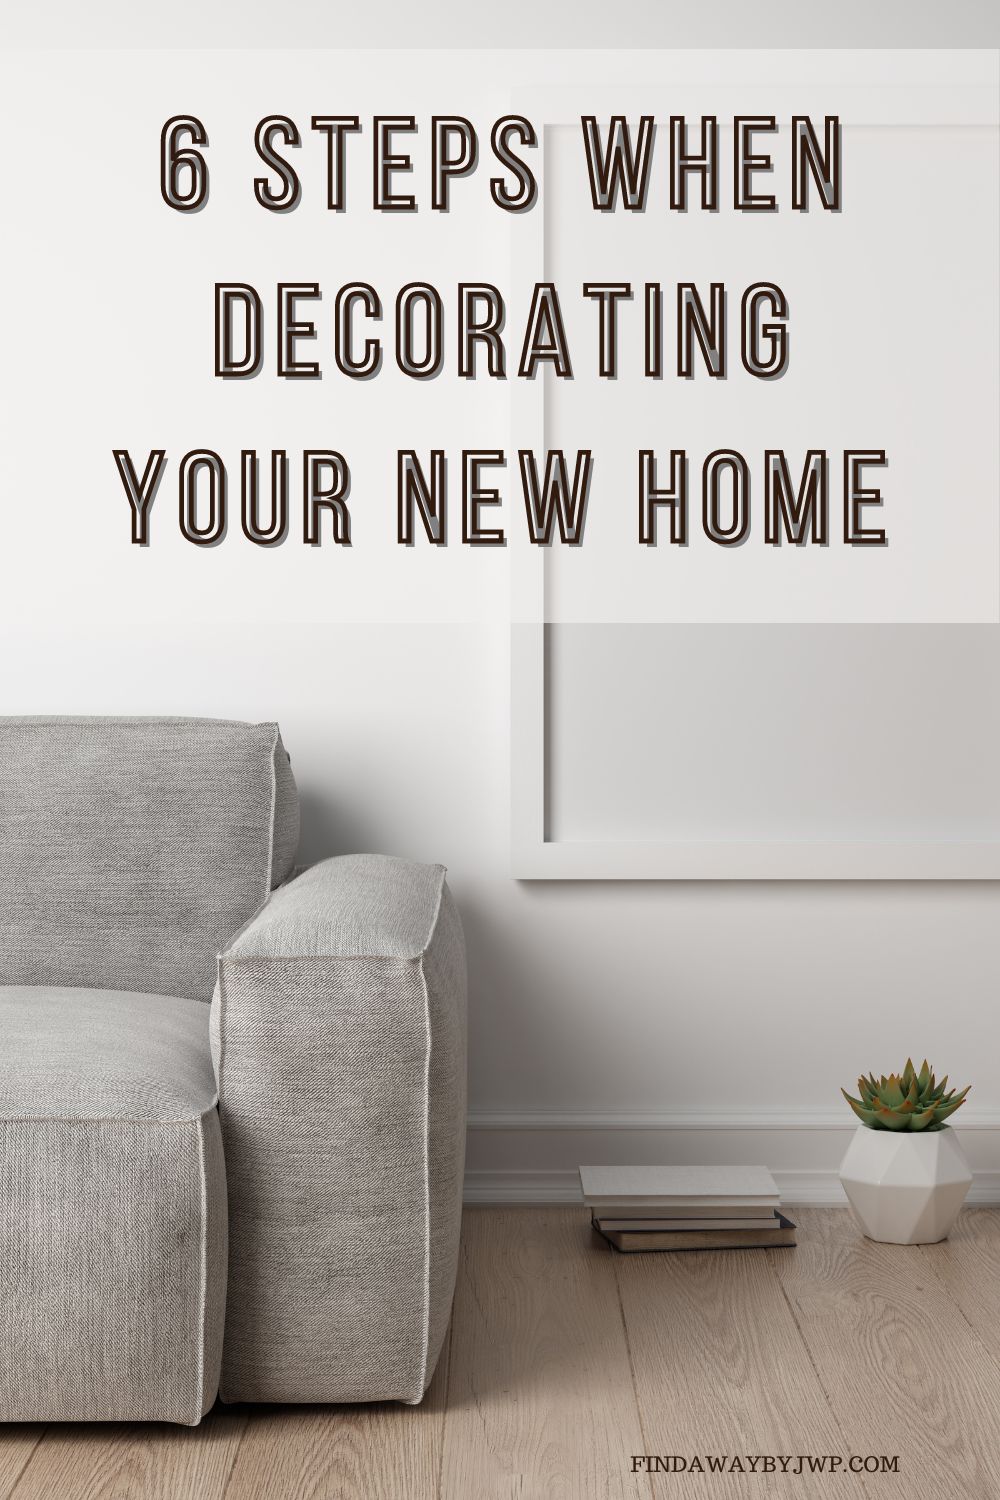 Six important steps when decorating your new home - Find A Way by JWP